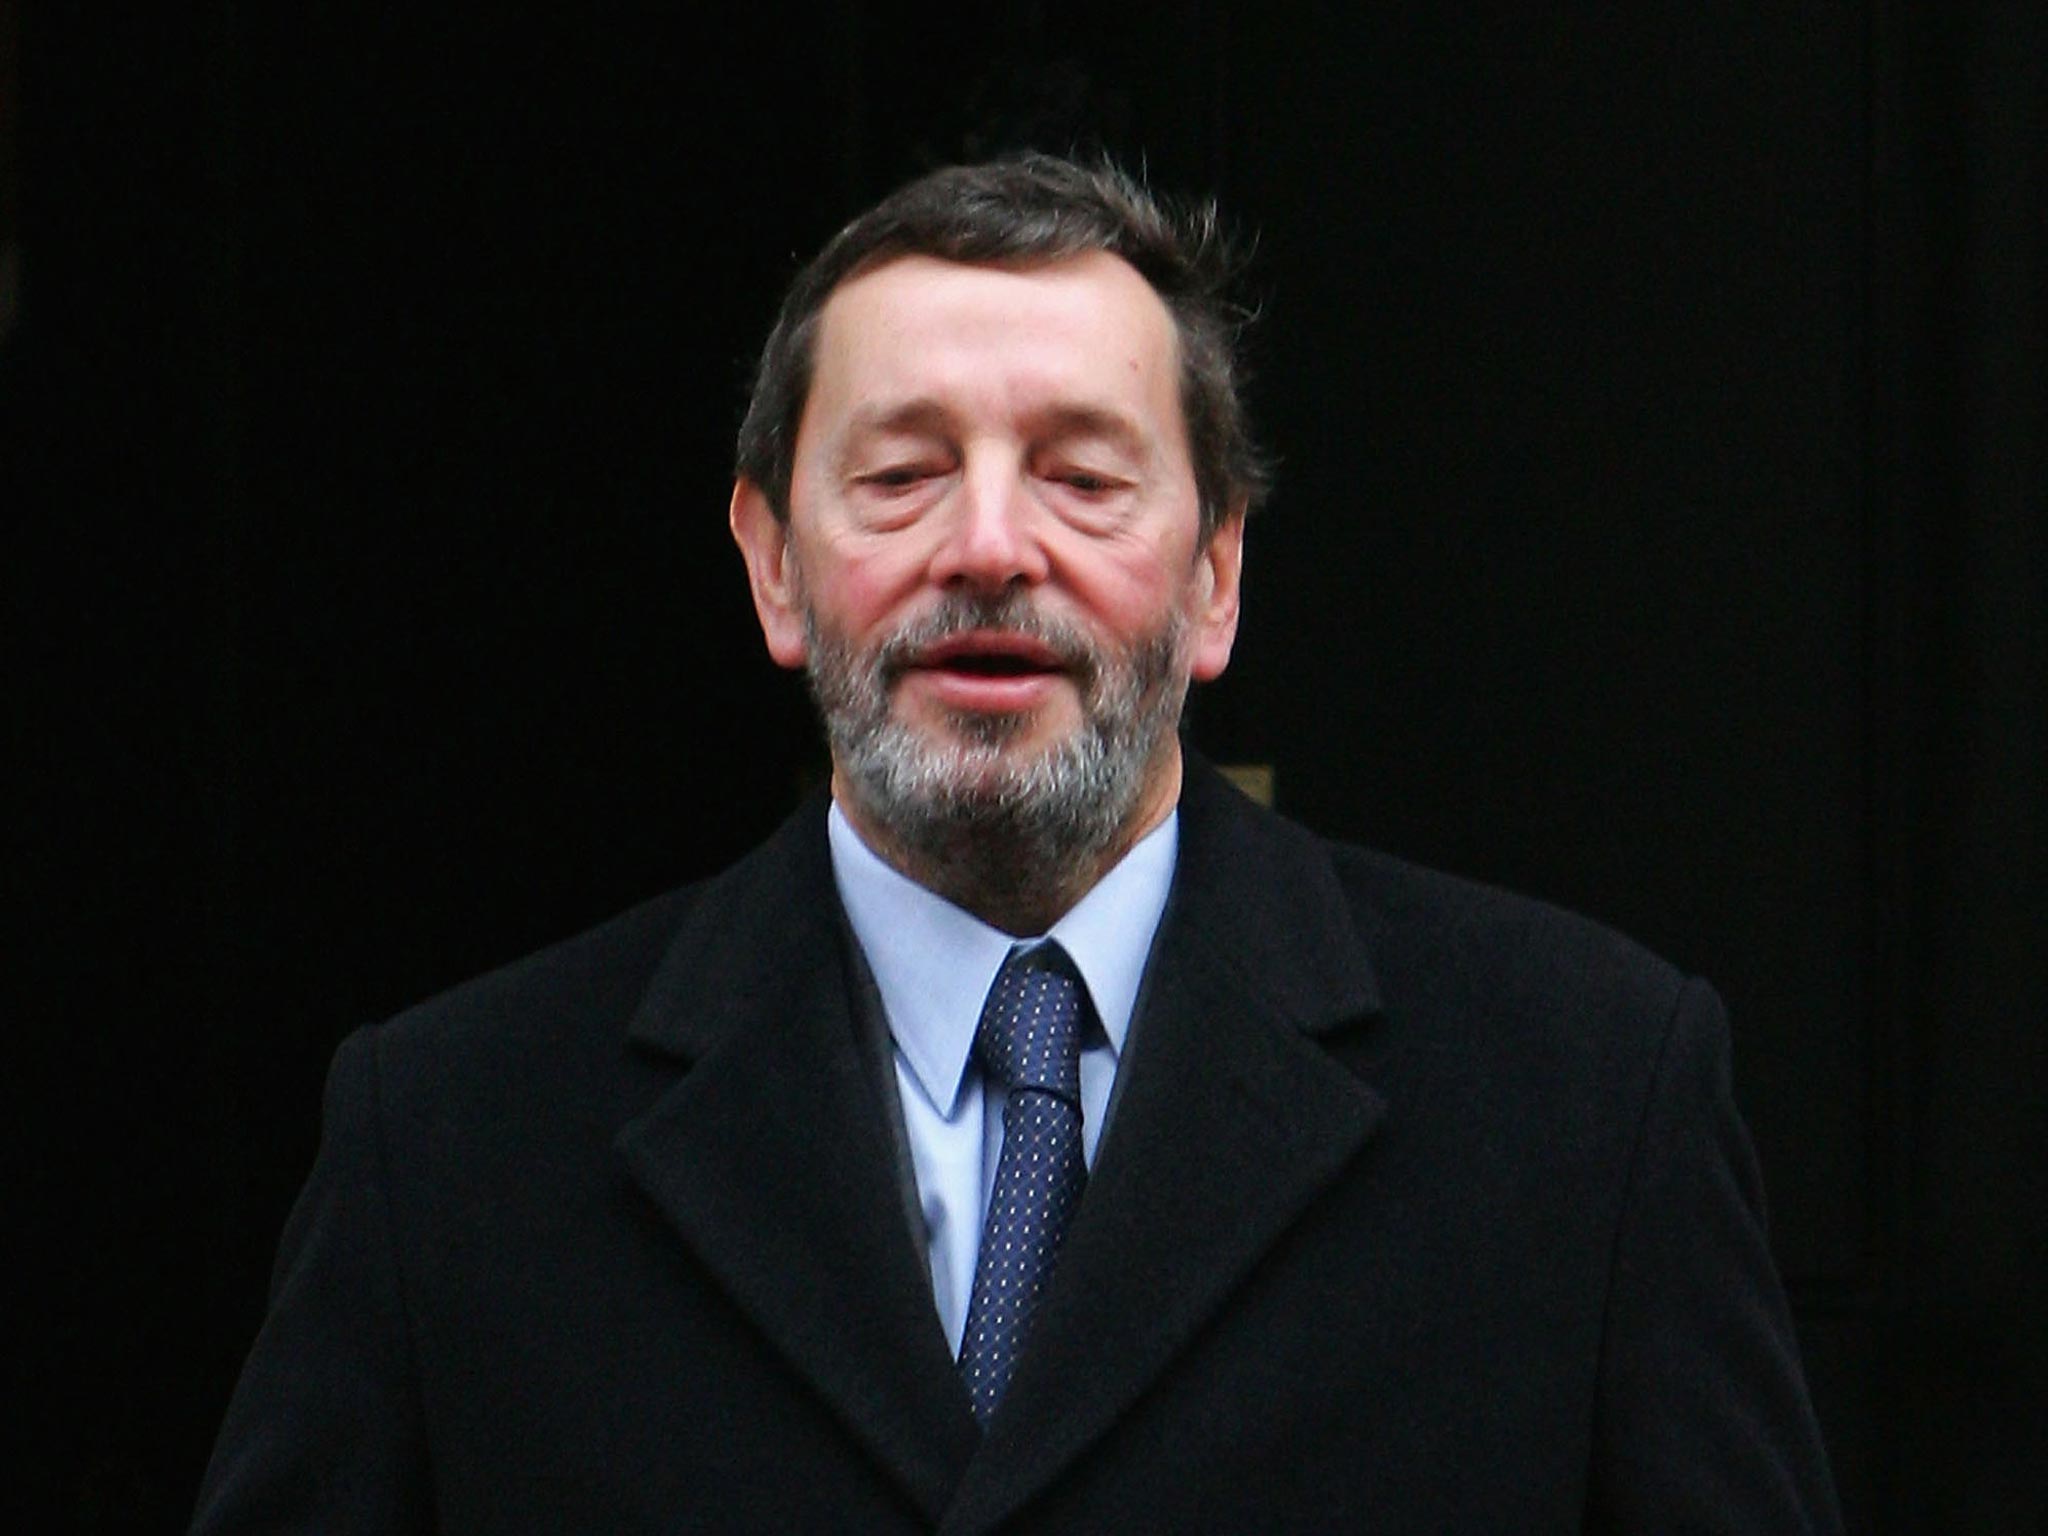 Former home secretary David Blunkett is to stand down